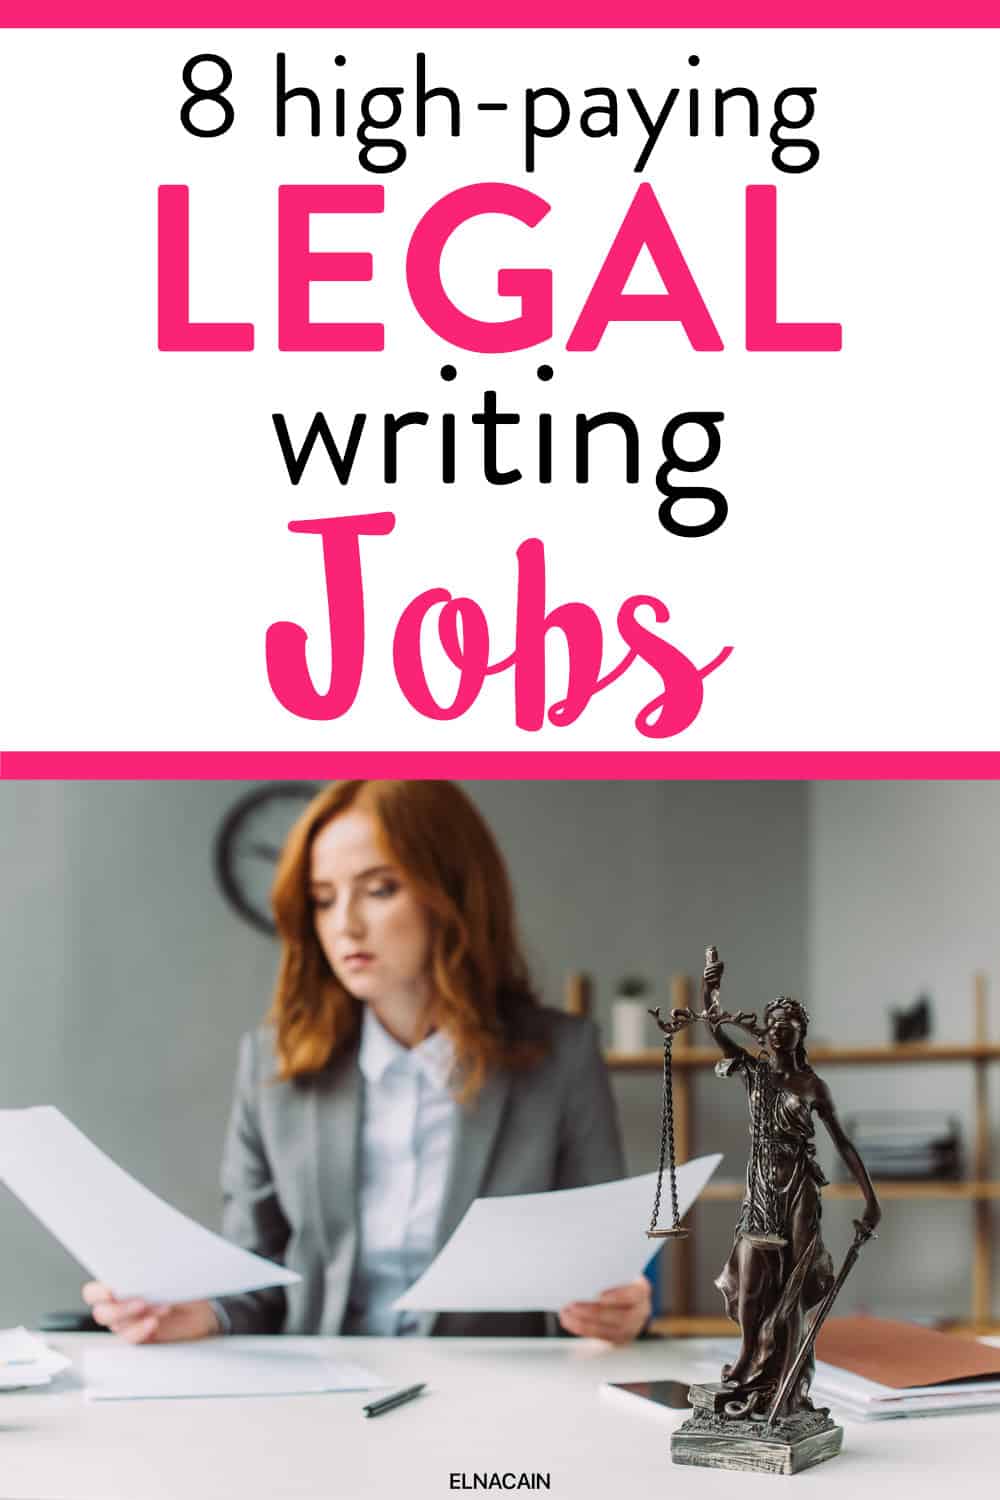 legal writing research jobs